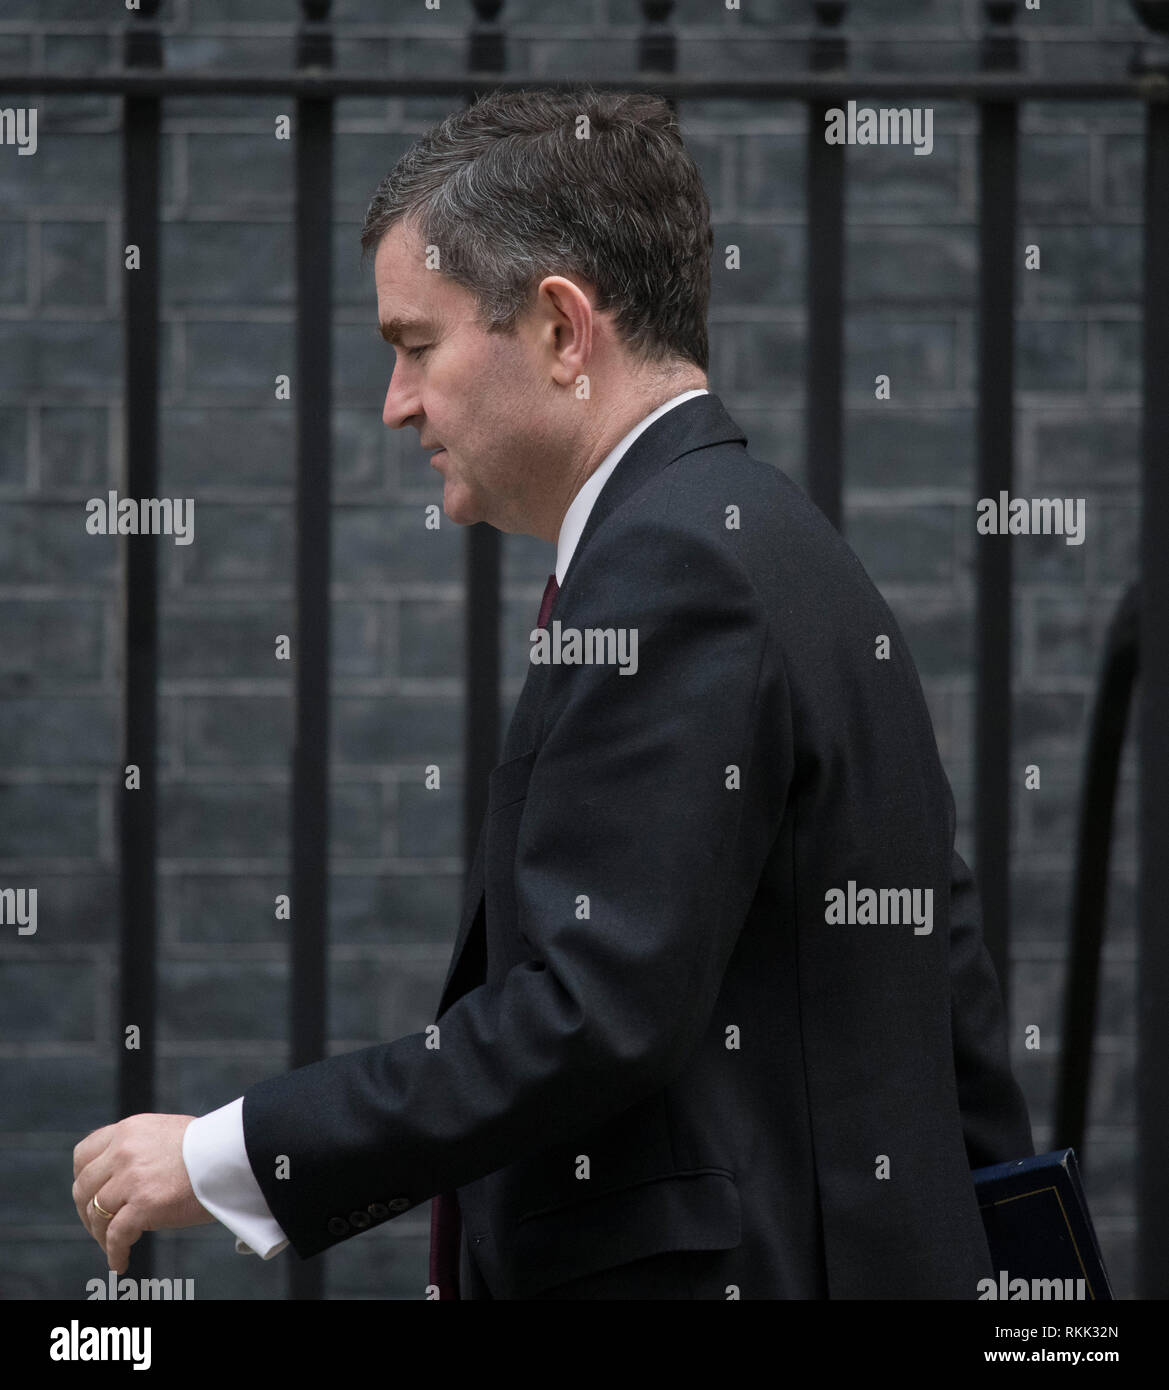 Downing Street, London, UK. 12 February 2019. Government Ministers arrive in Downing Street for weekly cabinet meeting. David Gauke, Secretary of State for Justice, Lord Chancellor. Credit: Malcolm Park/Alamy Live News. Stock Photo